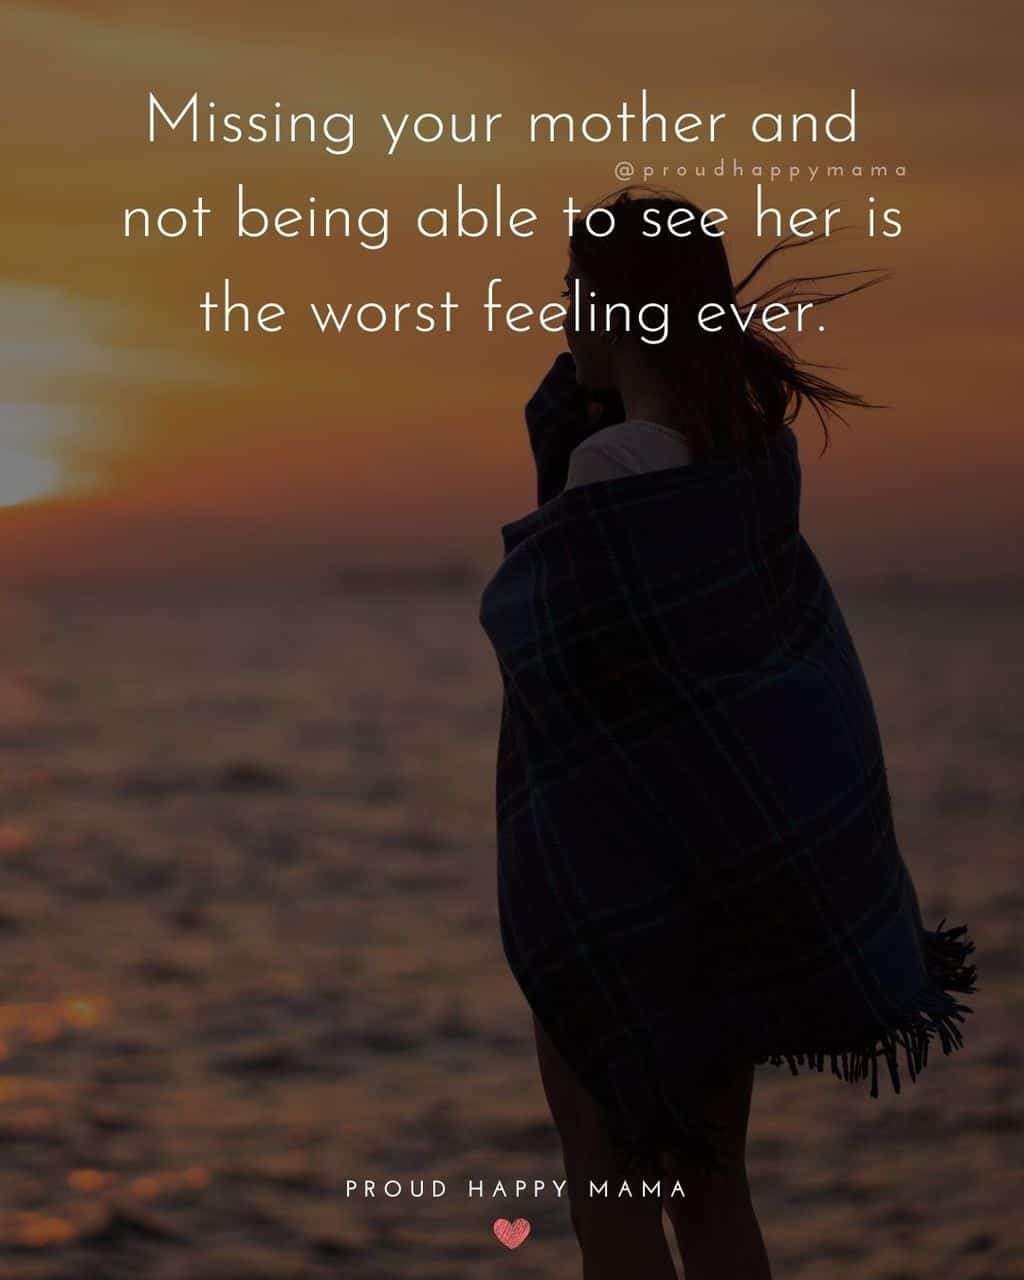 Woman wrapped in a blanket looking out to the ocean with text overlay, ‘Missing your mother and not being able to see her is the worst feeling ever.’